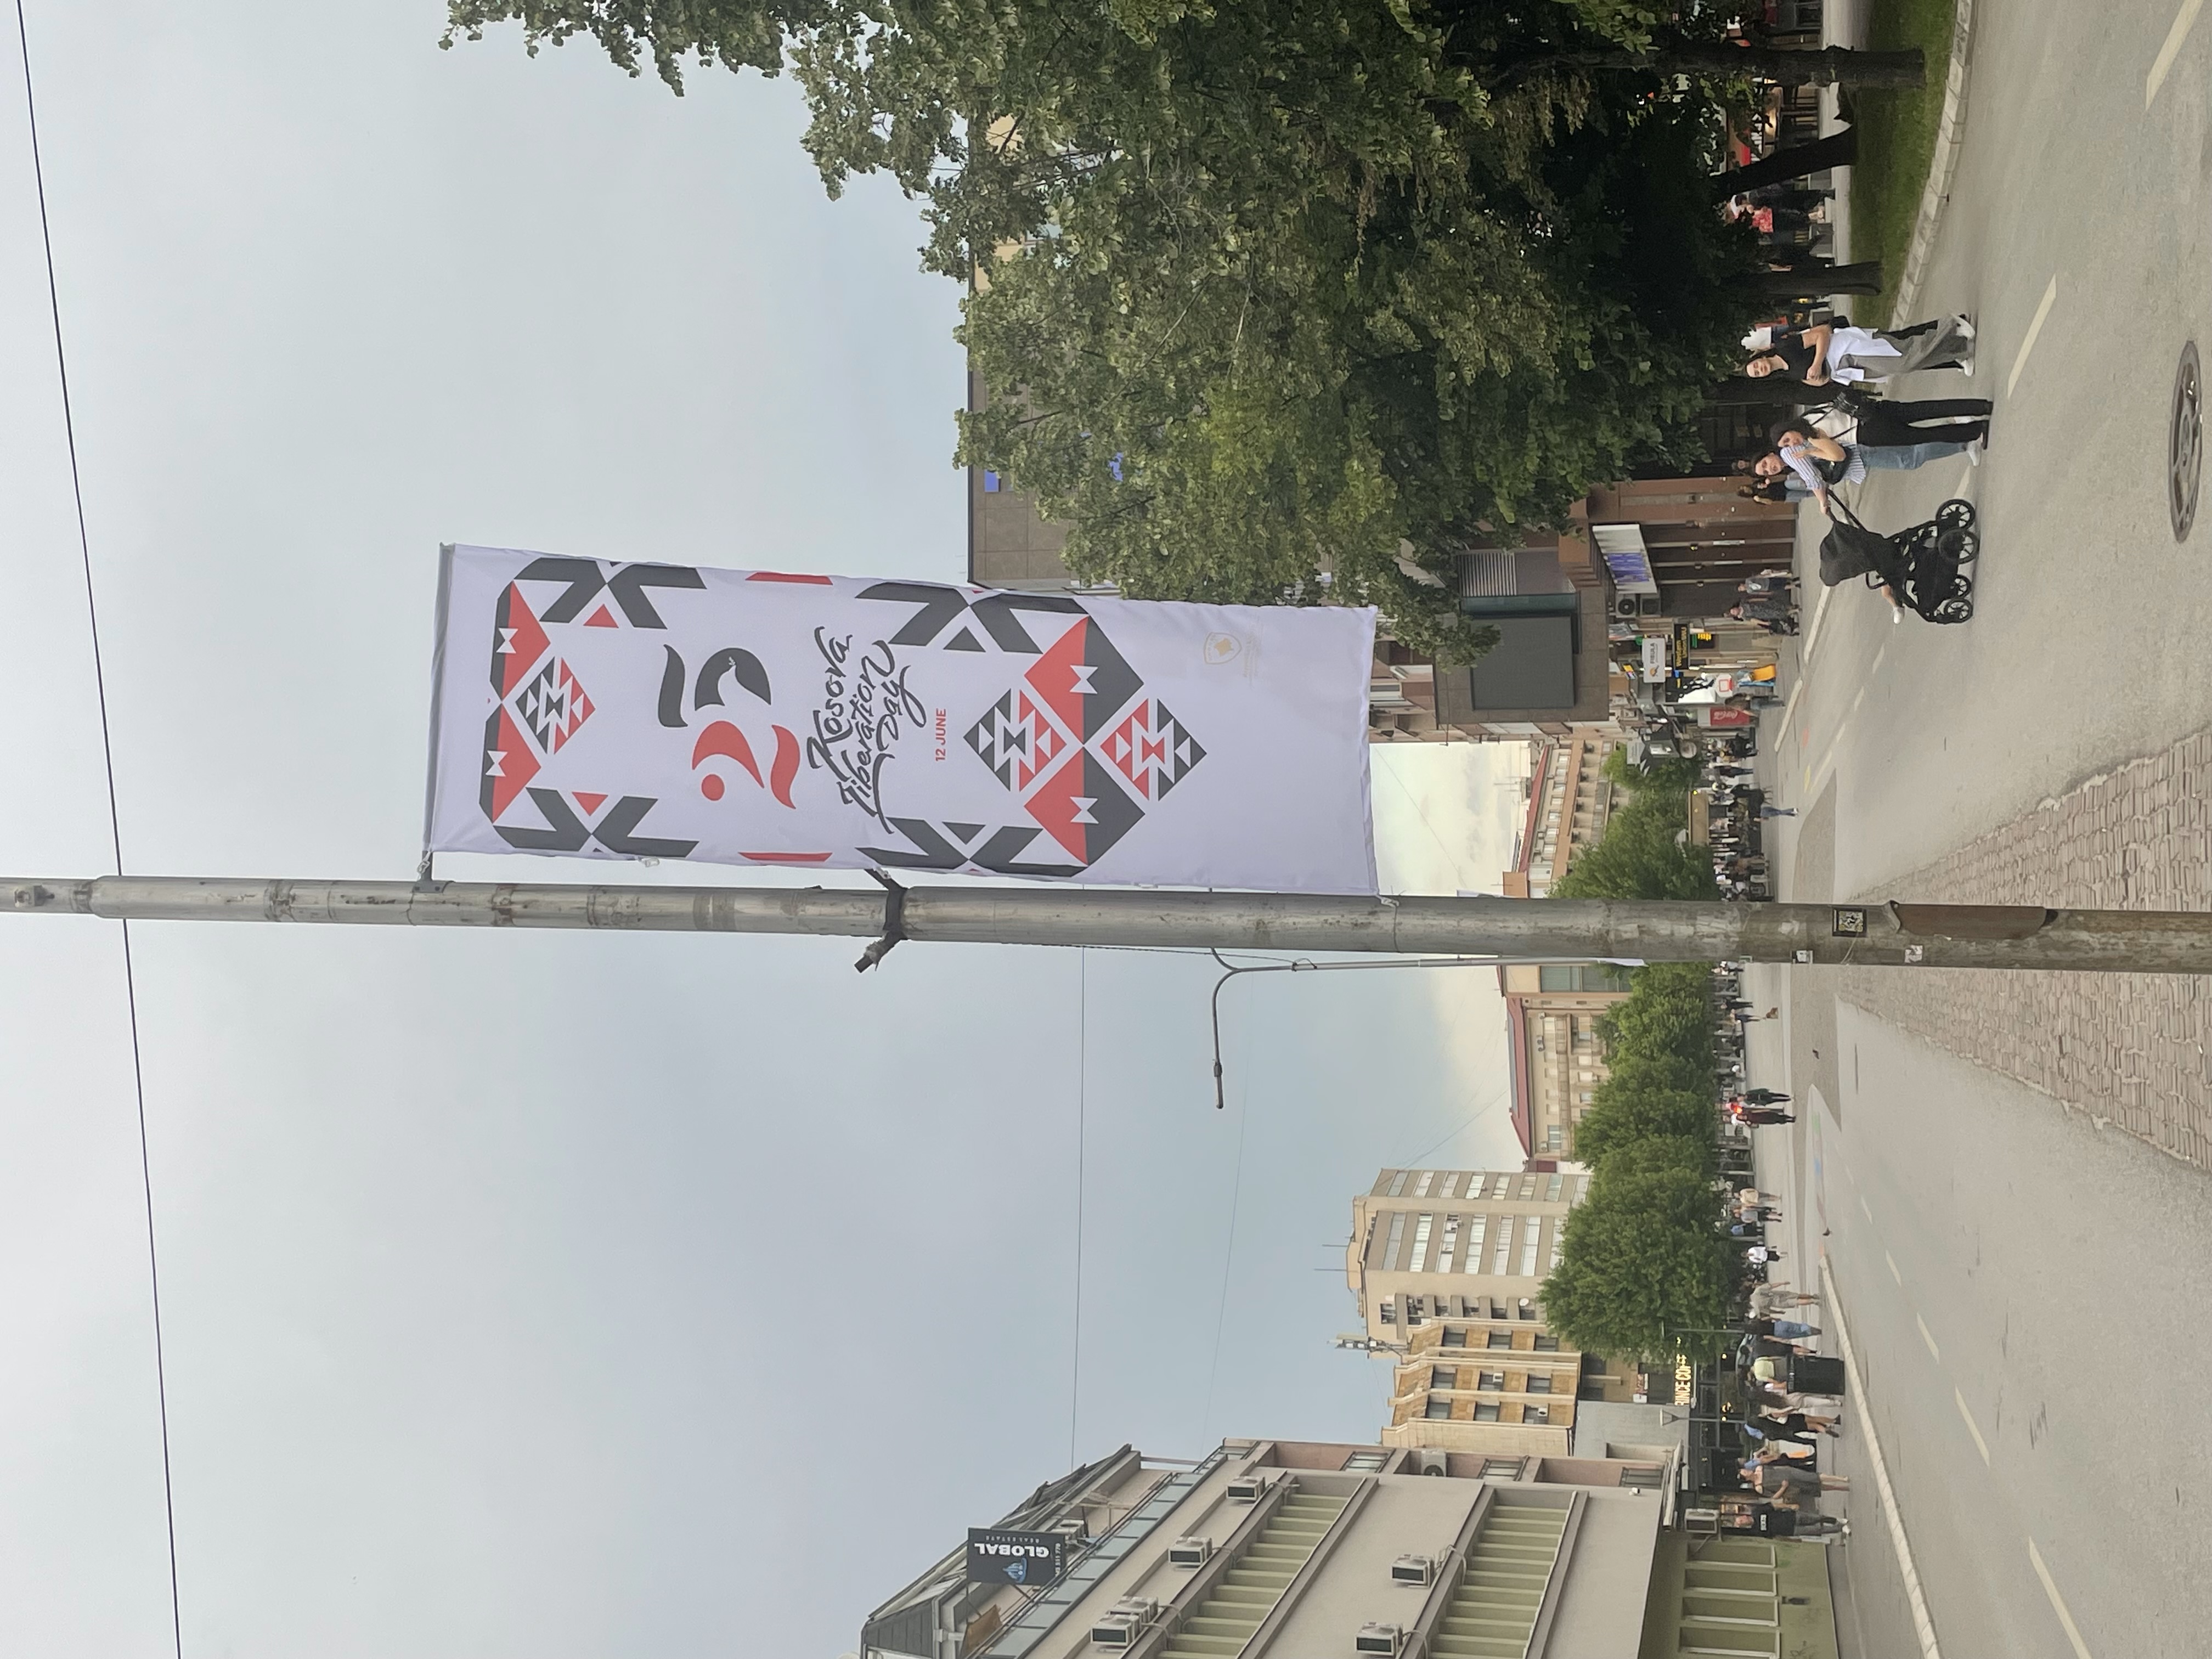 A banner downtown that says "Kosova Liberation Day" and "June 12" with the number 25.